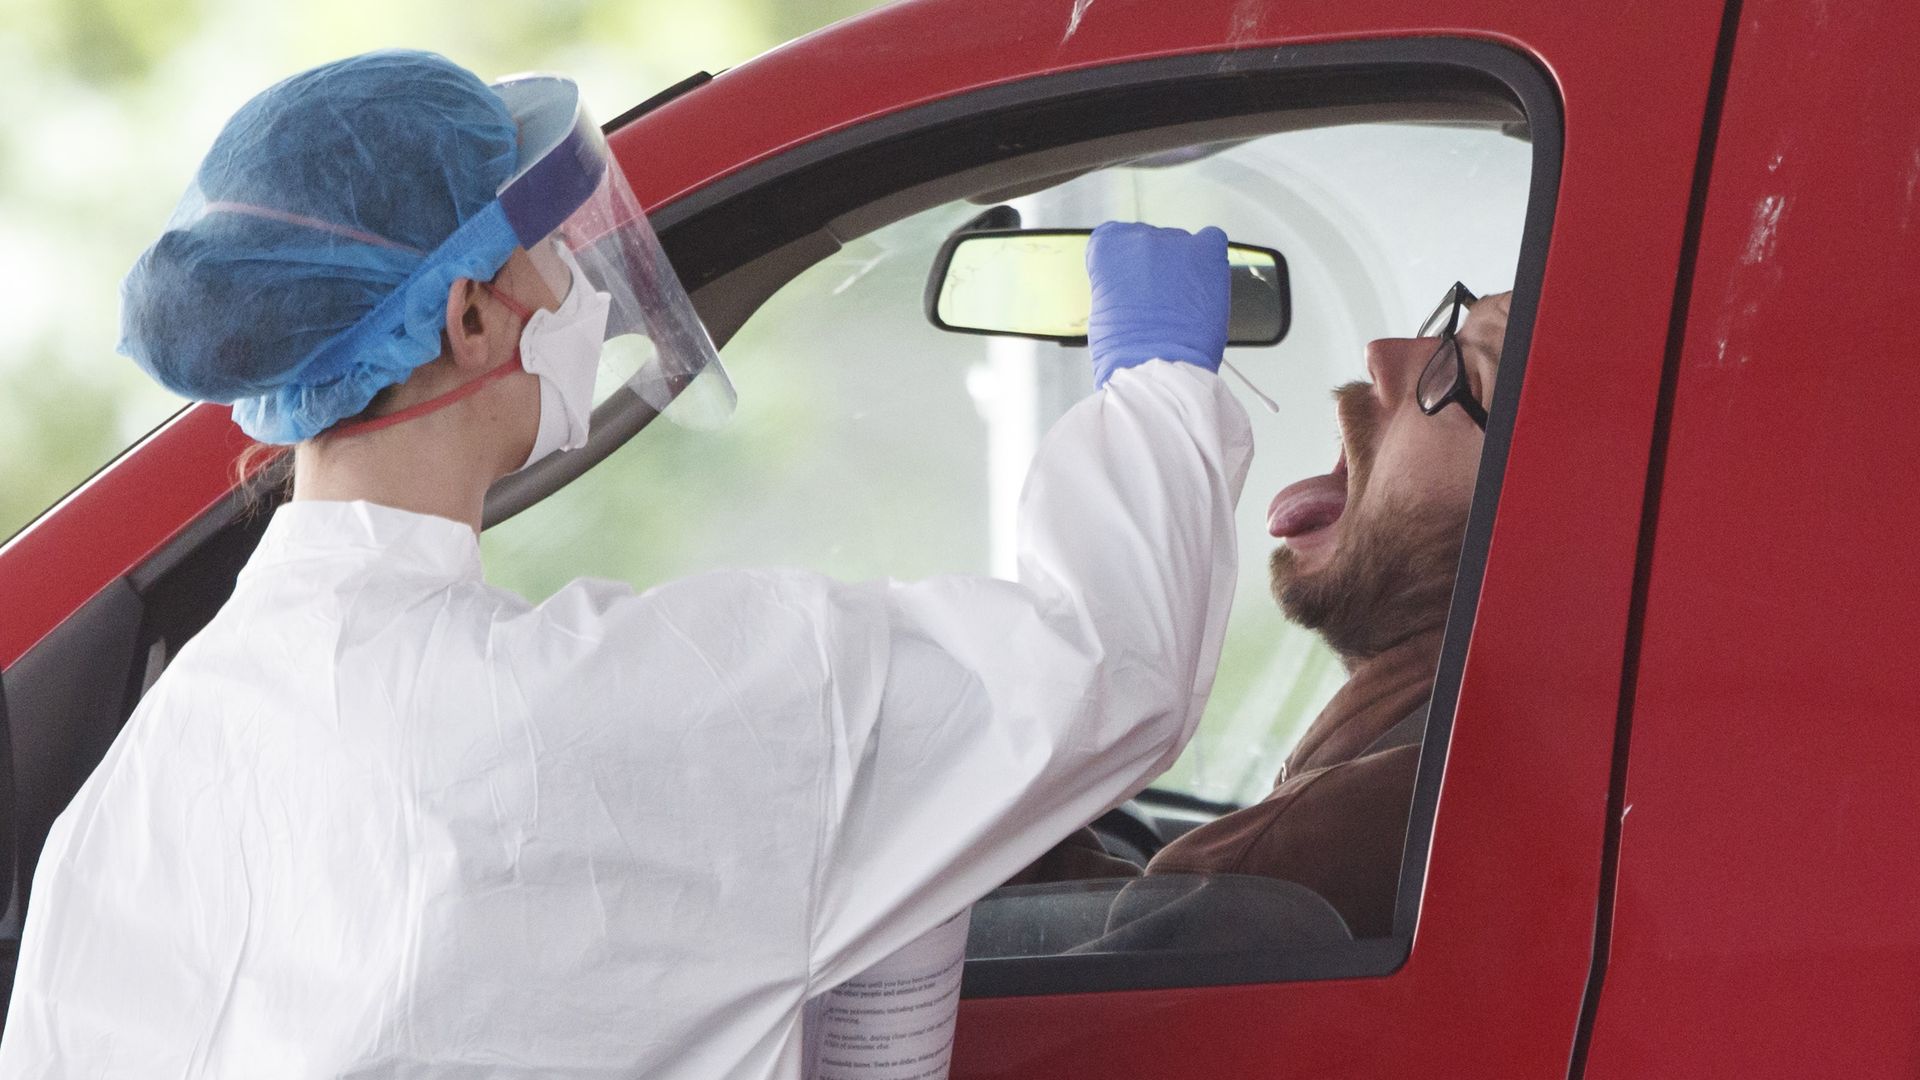 A medical worker takes a swab sample at a COVID-19 drive-thru testing site